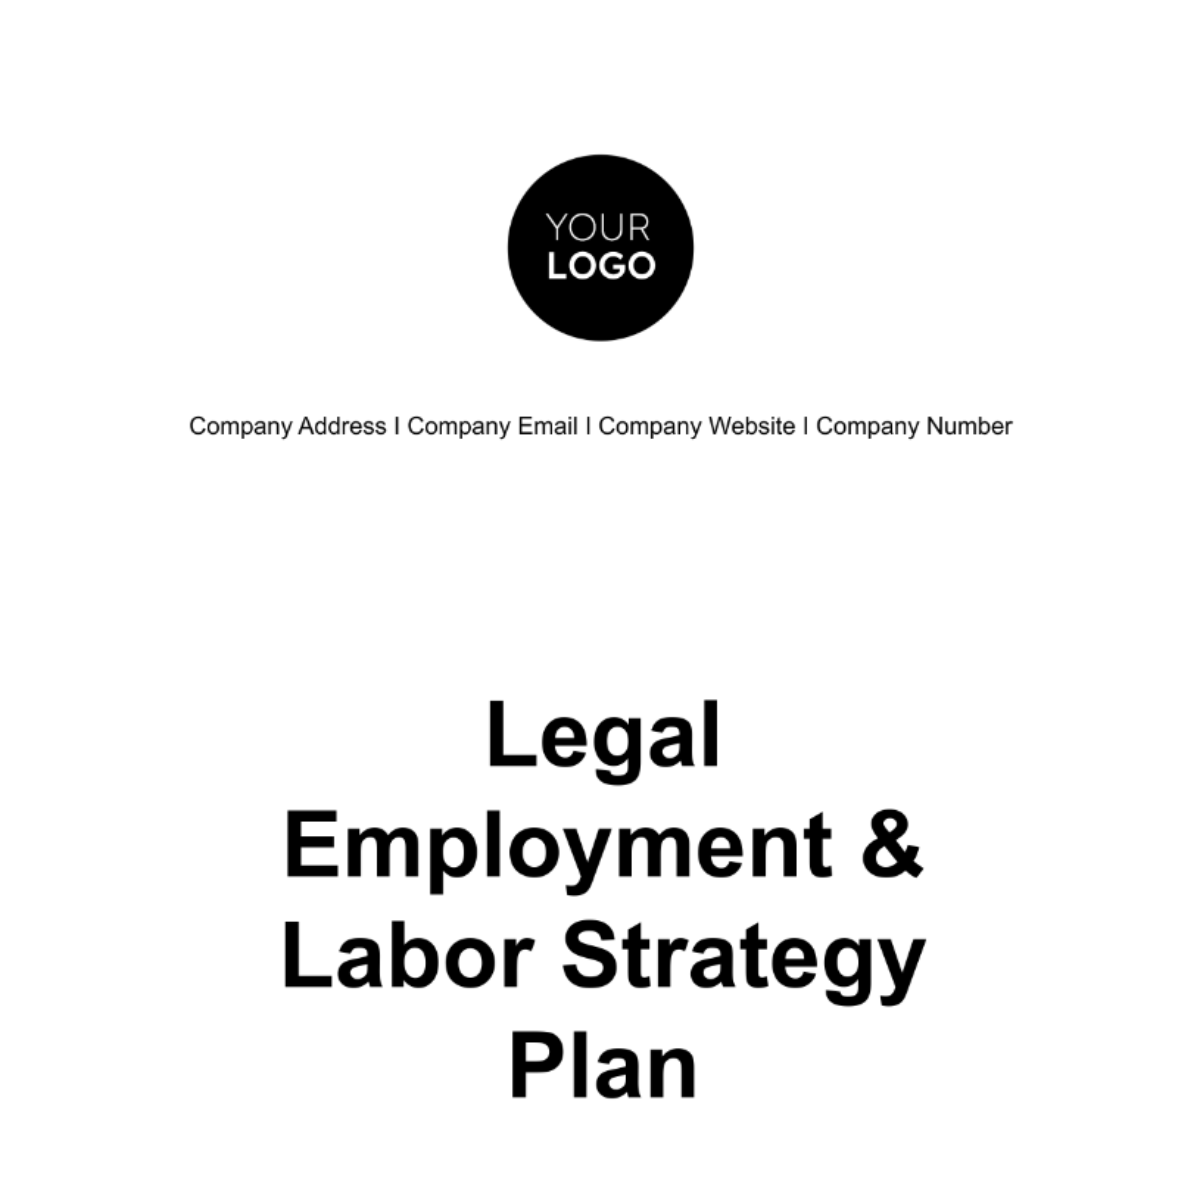 Free Legal Employment & Labor Strategy Plan Template